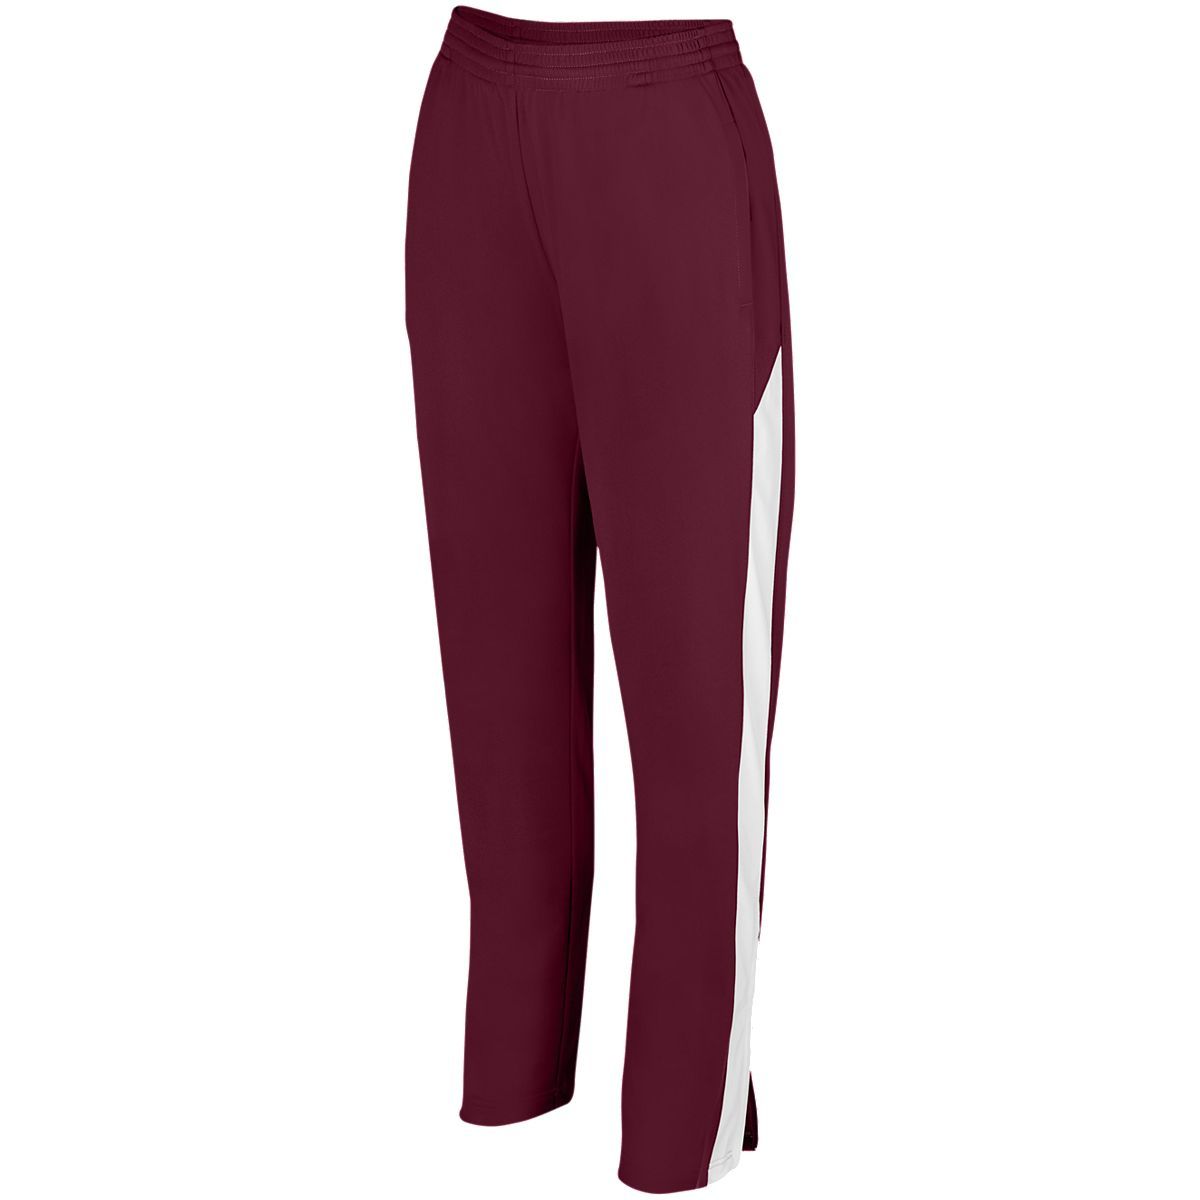 Augusta Sportswear Ladies Medalist Pant 2.0 in Maroon/White  -Part of the Ladies, Ladies-Pants, Pants, Augusta-Products product lines at KanaleyCreations.com